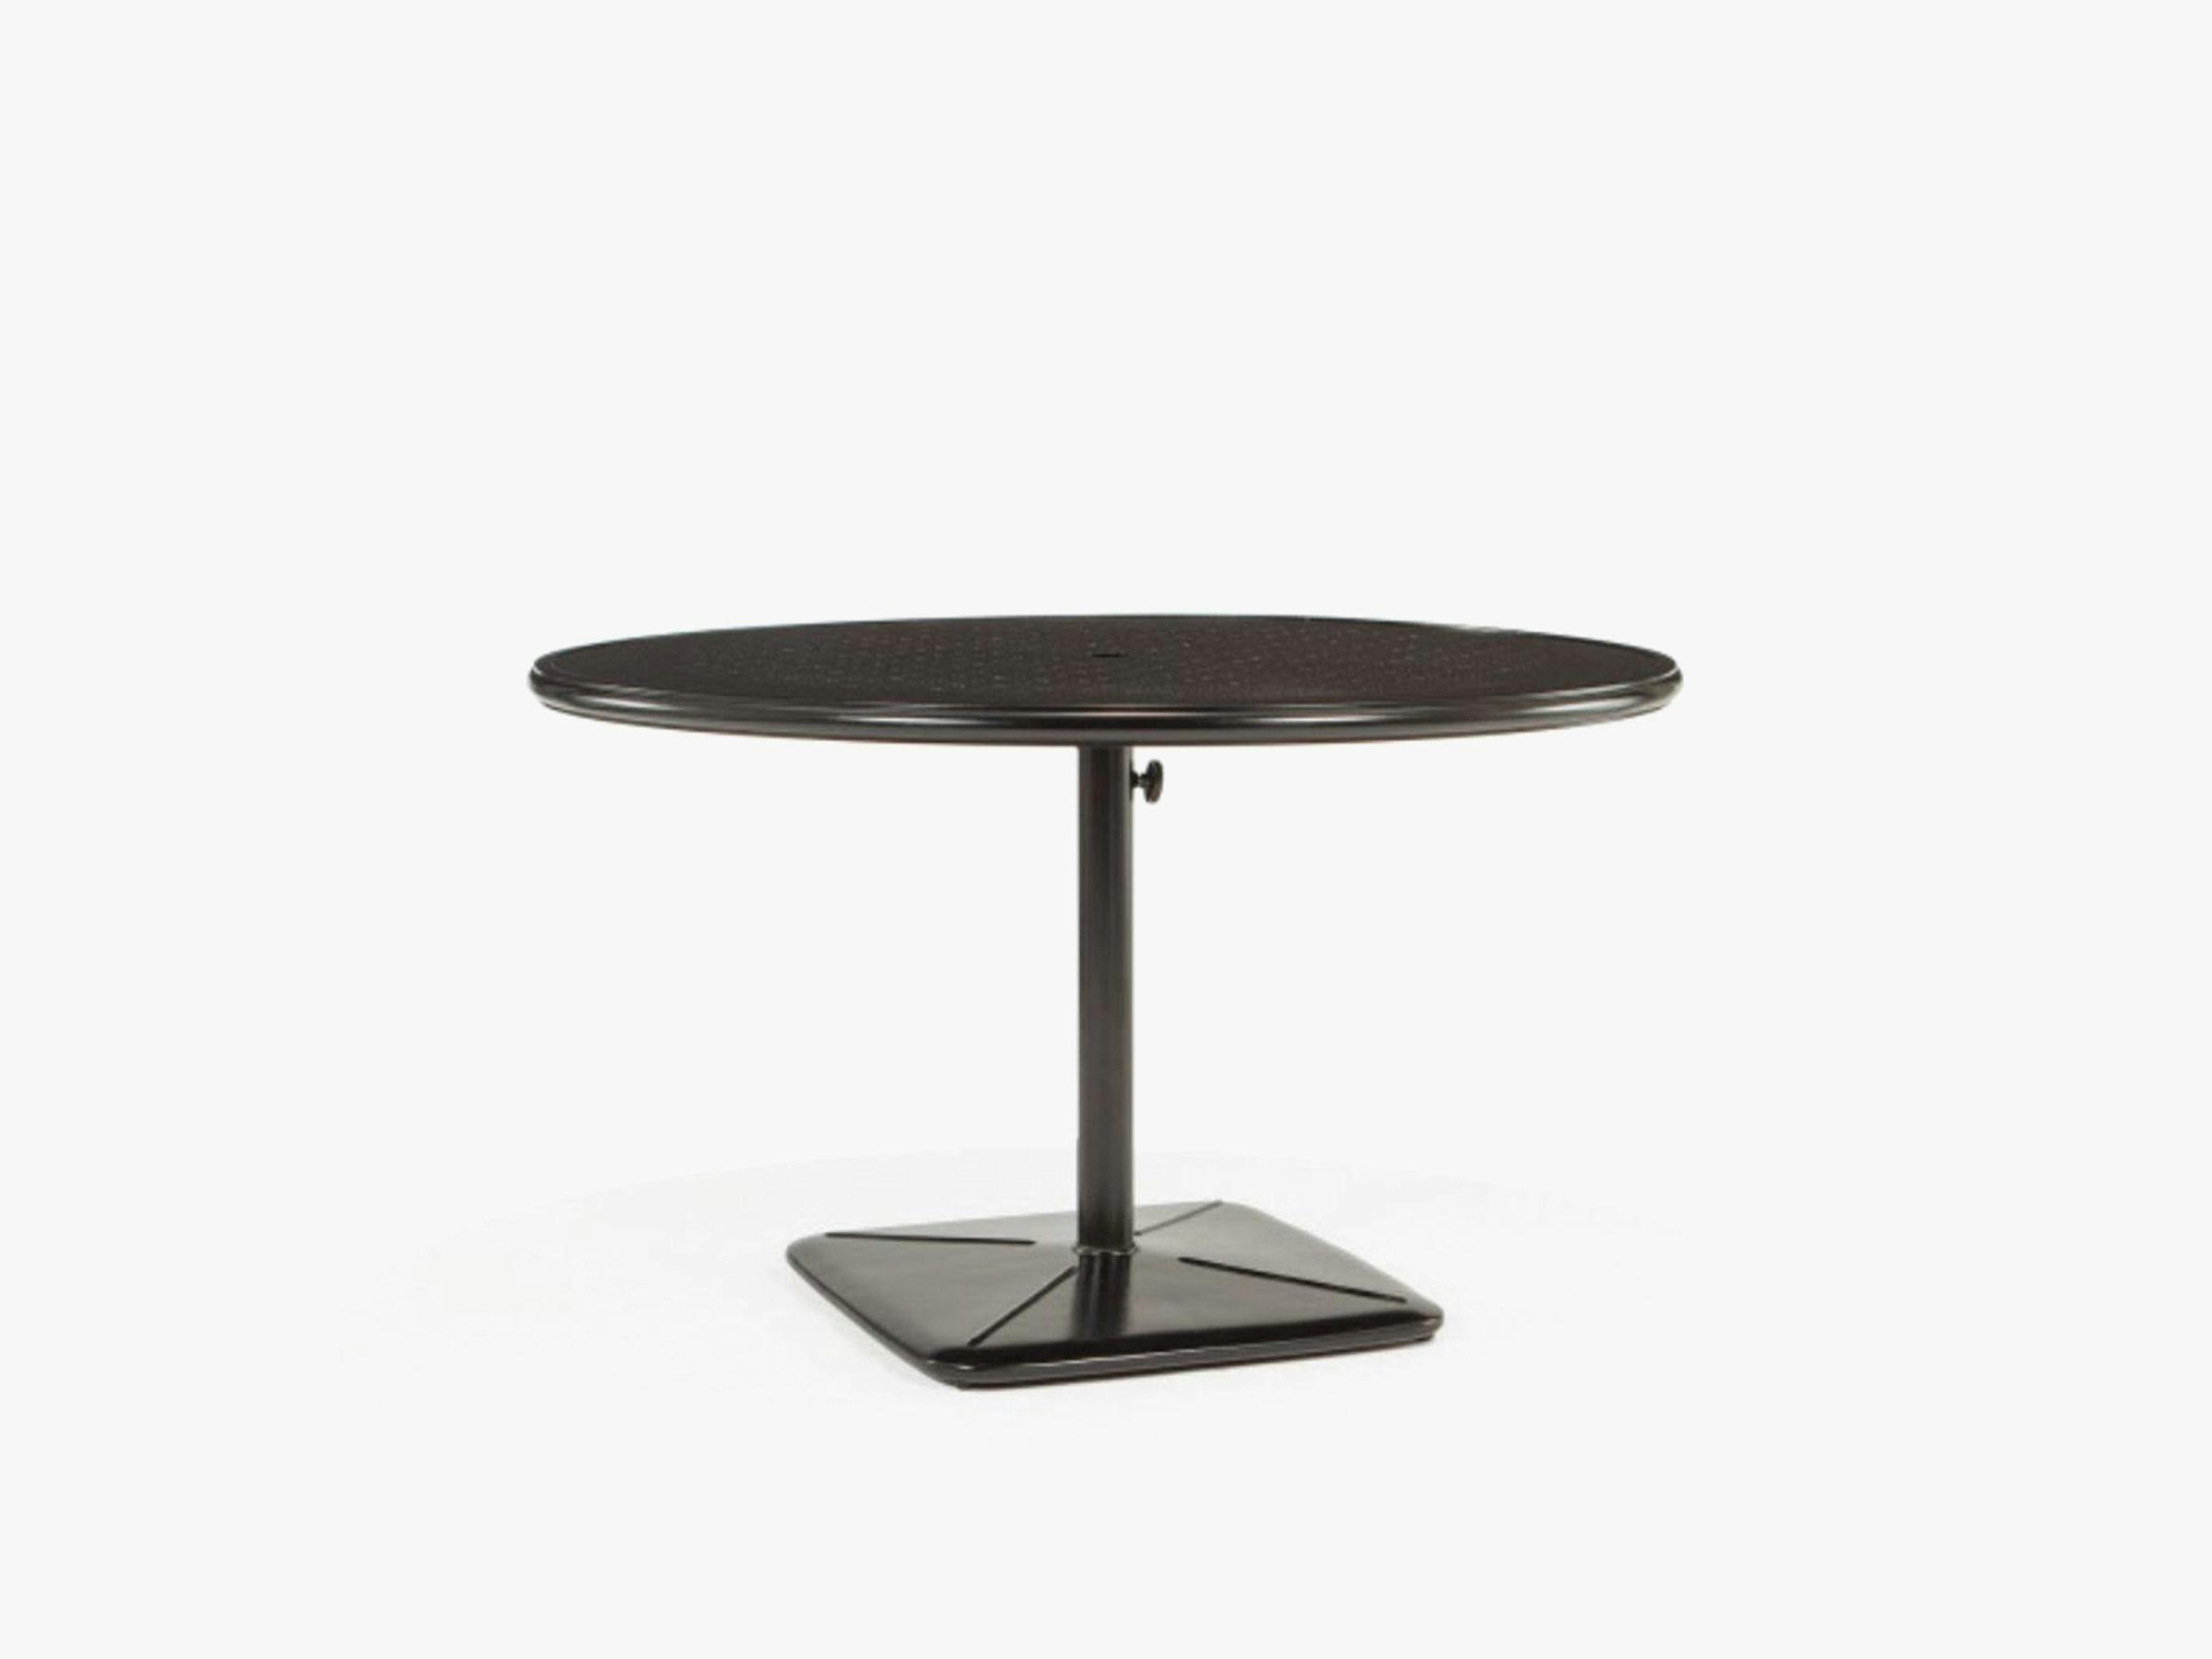 48" Round Dining Cafe Table with Umbrella Hole and Cast Plug